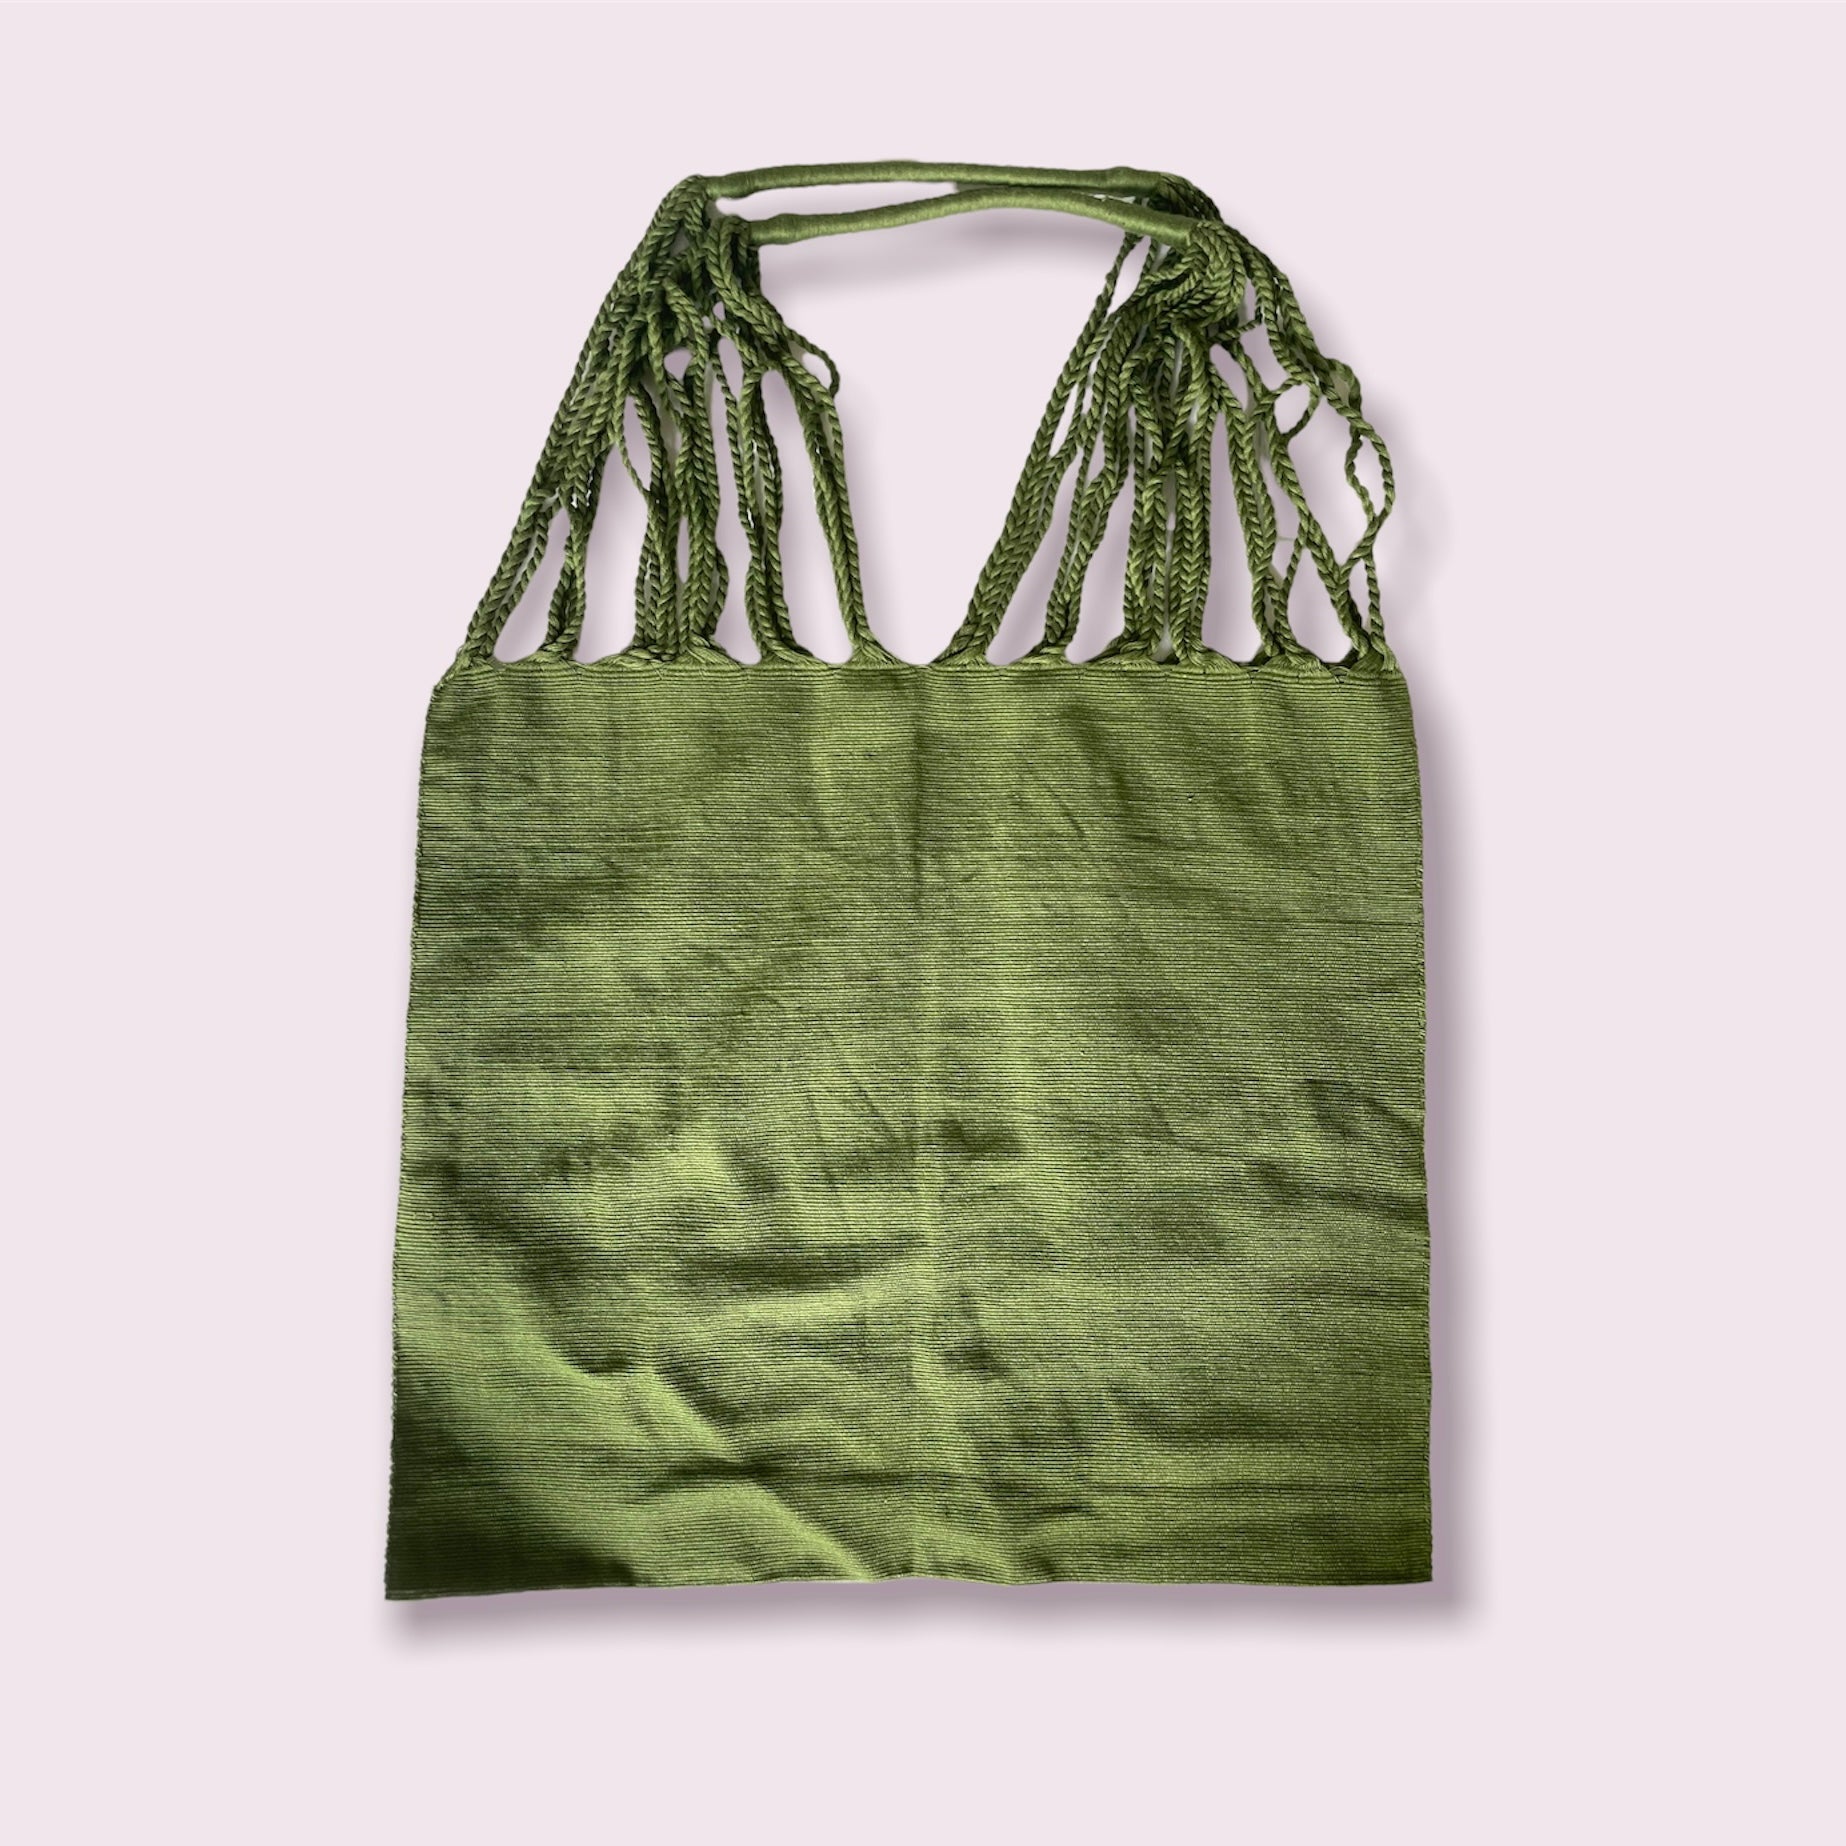 Mexican Cotton Loom Market Bag 16 x 14 in